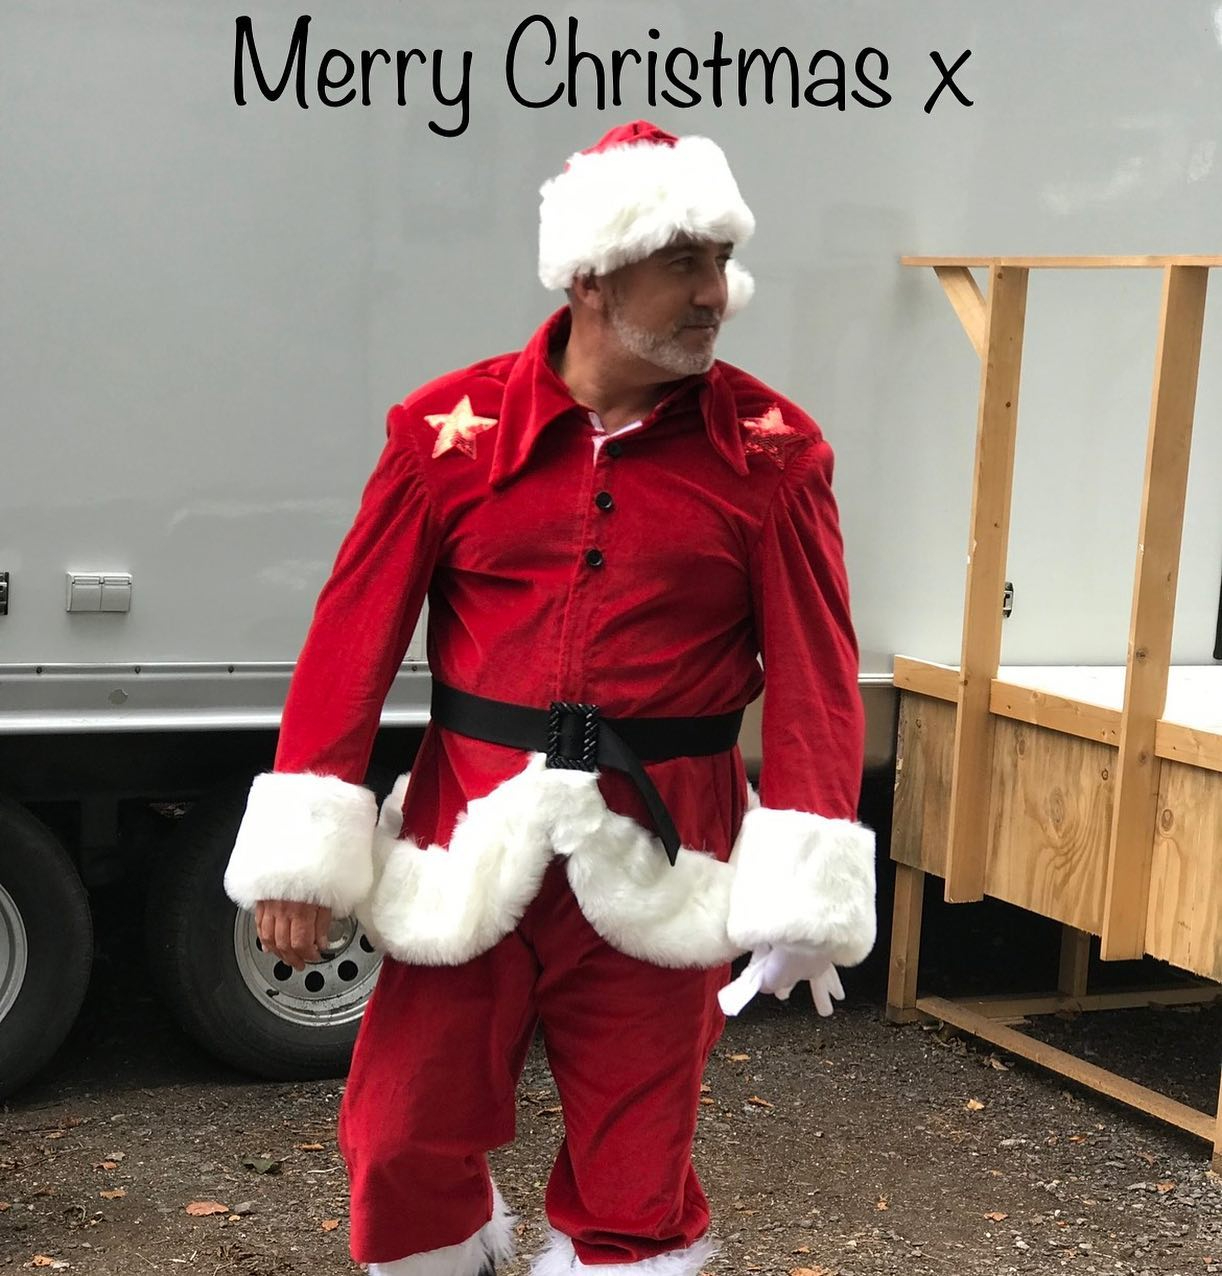 Paul Hollywood turns into a sexy Santa as he sends Christmas message to Bake Off fans